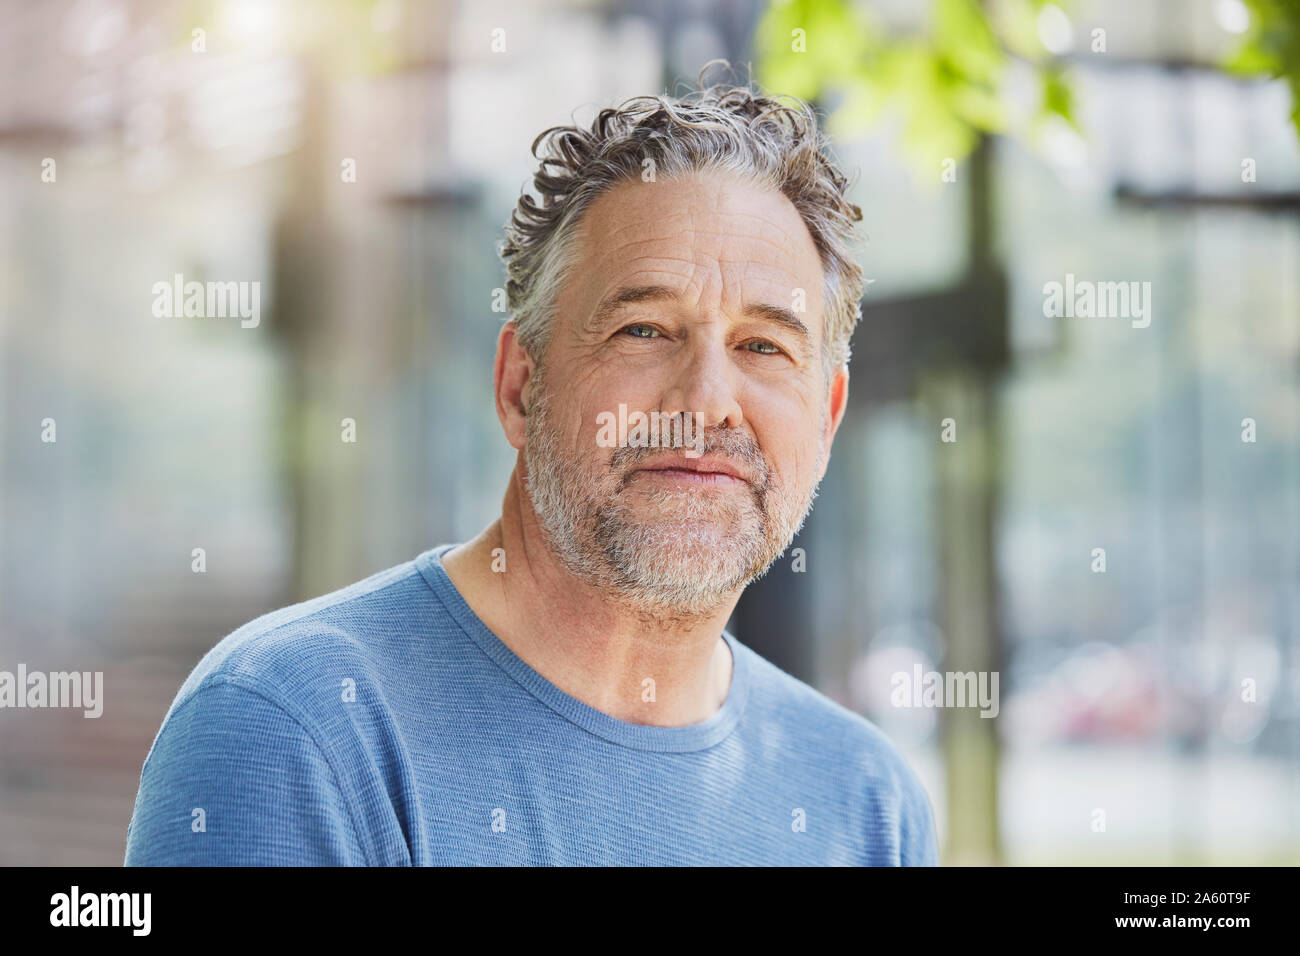 Portrait of mature man in a park Stock Photo